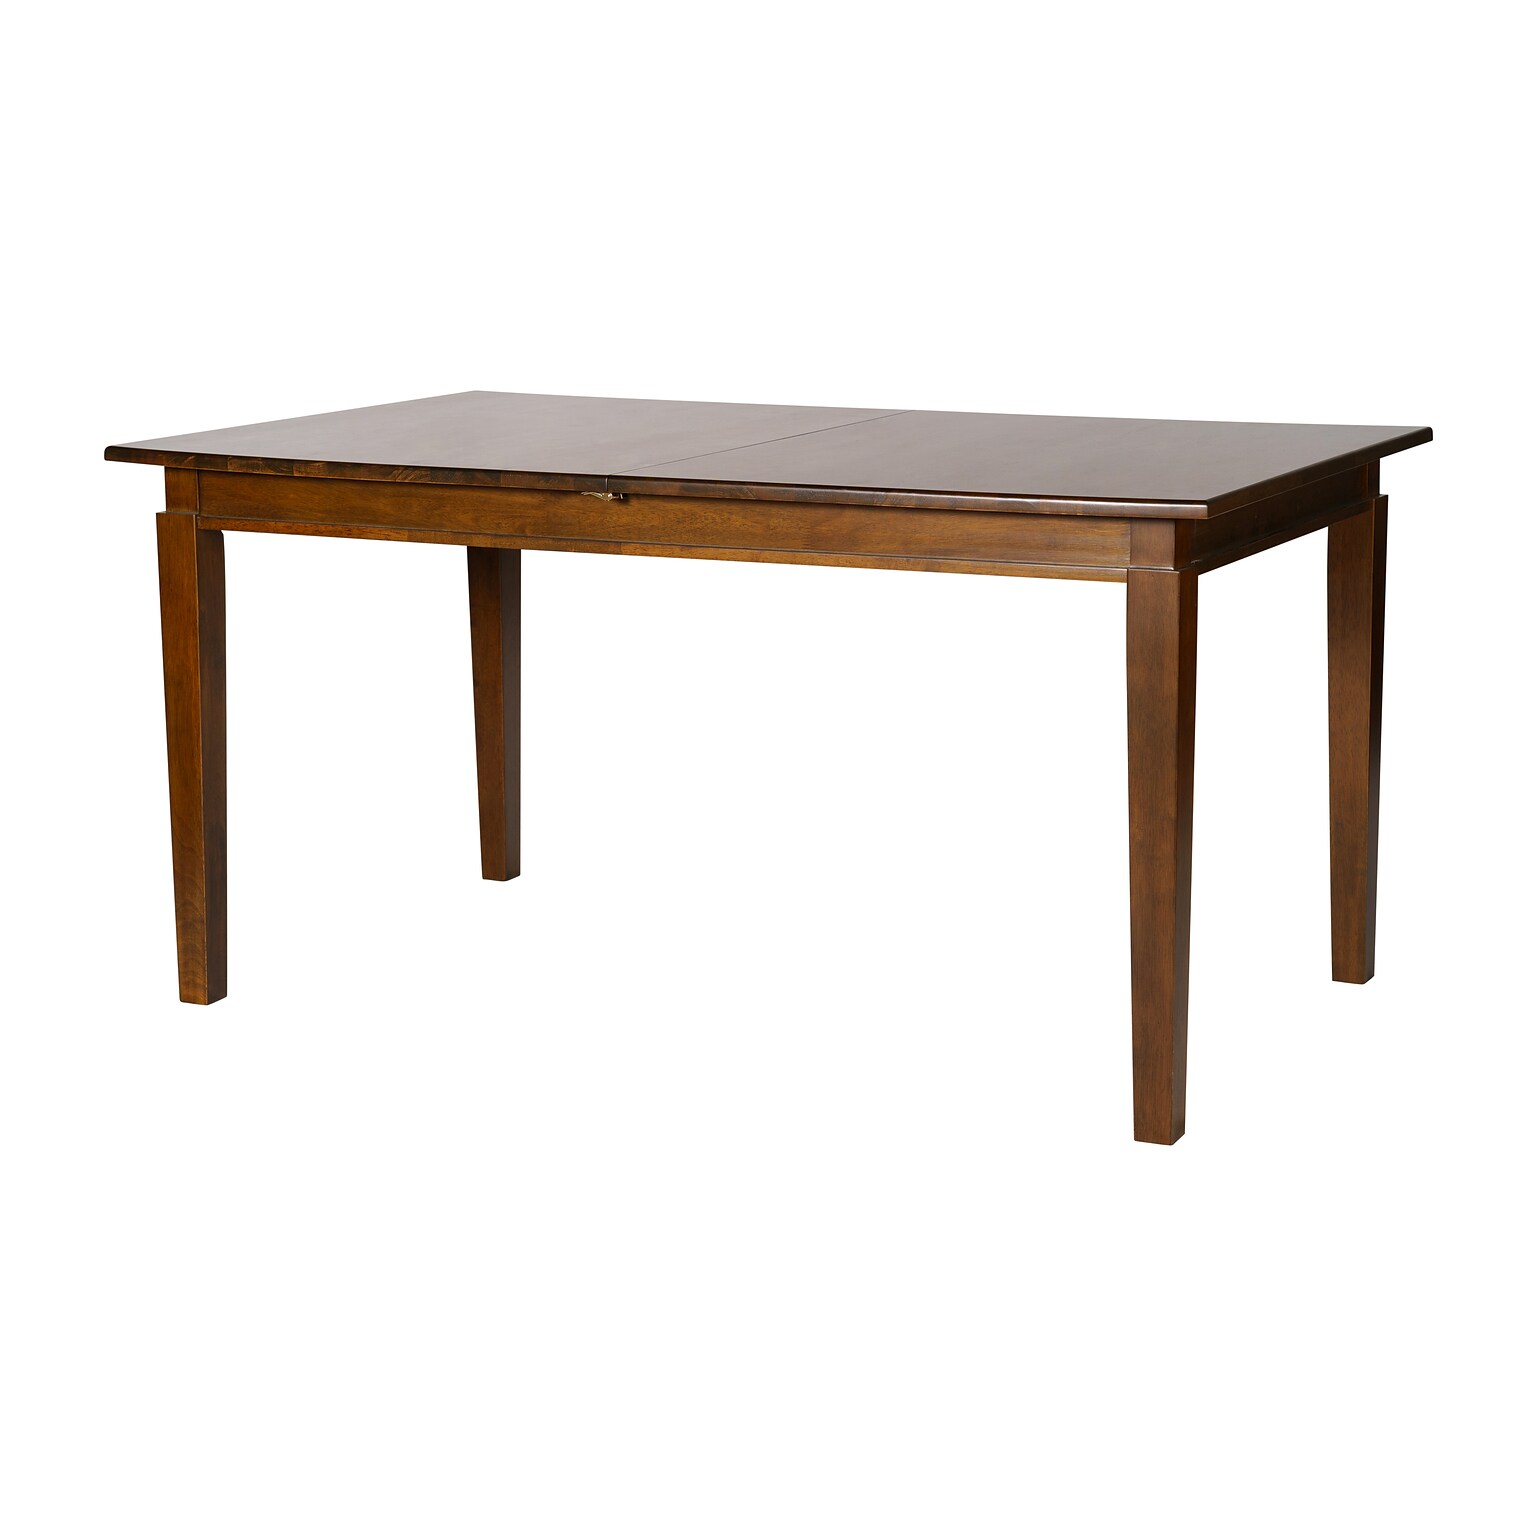 Flash Furniture Henry Wooden Dining Table with Extension Panel, 36 x 72, Matte Brown (KERT217EXBRN72)